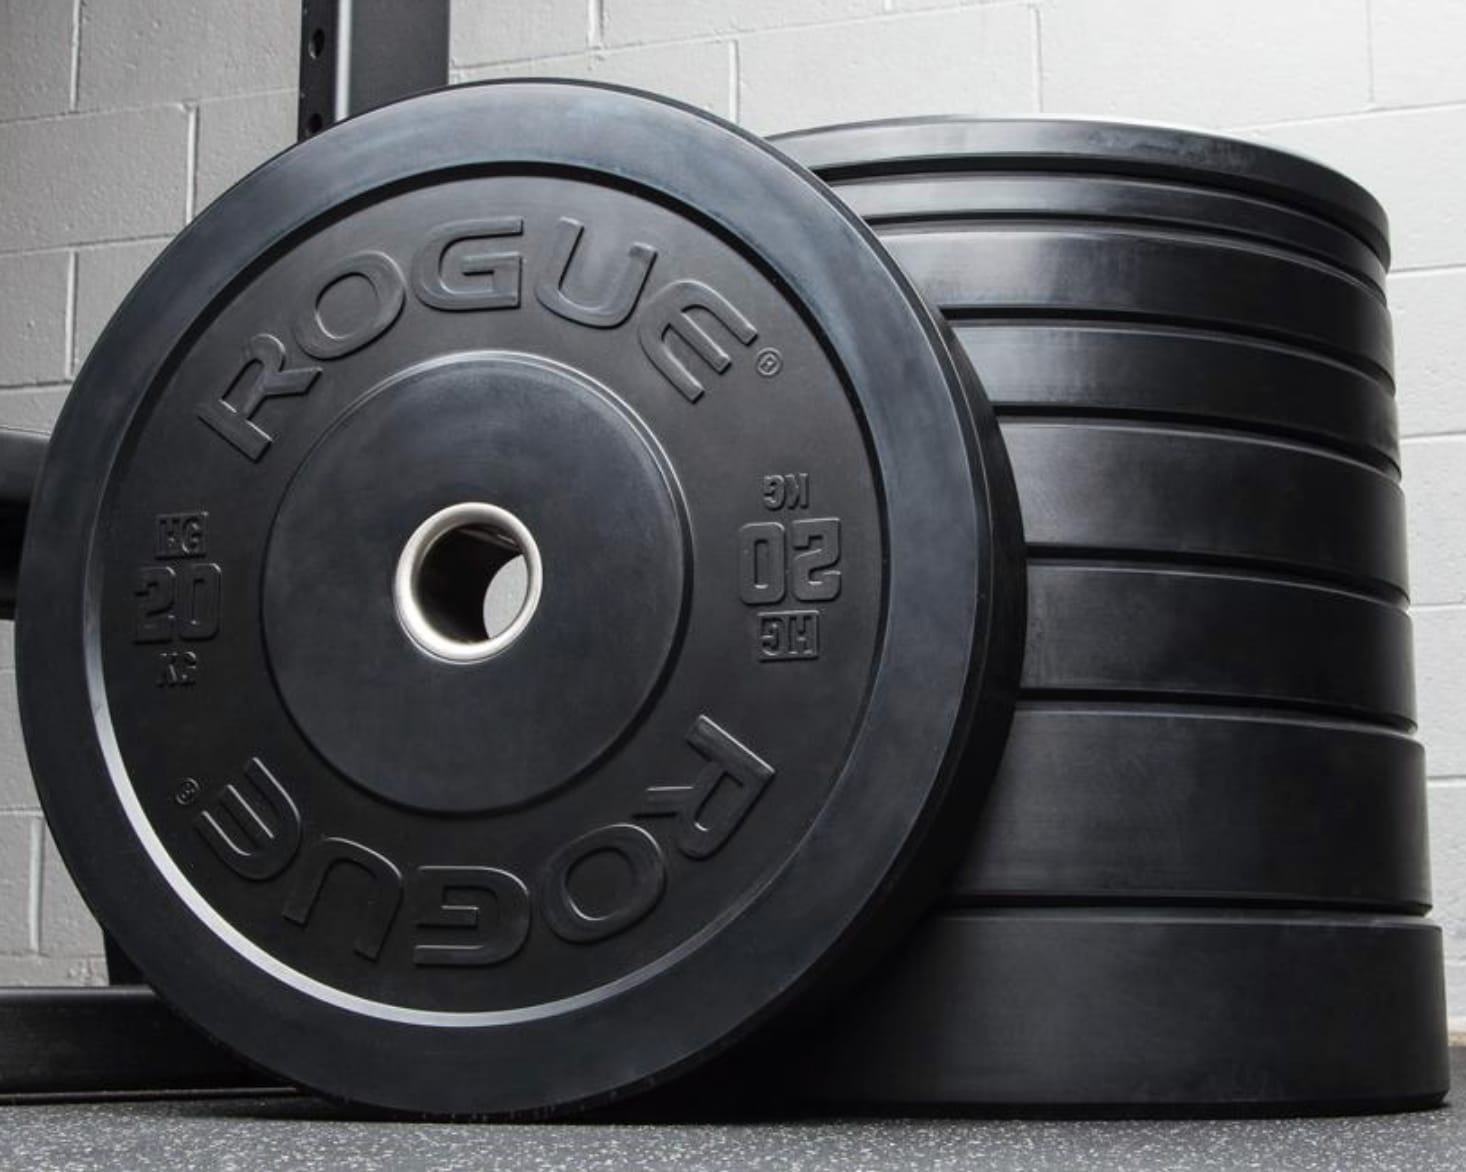 KG Rogue Bumpers - Dead Bounce Bumper Plates - Weightlifting